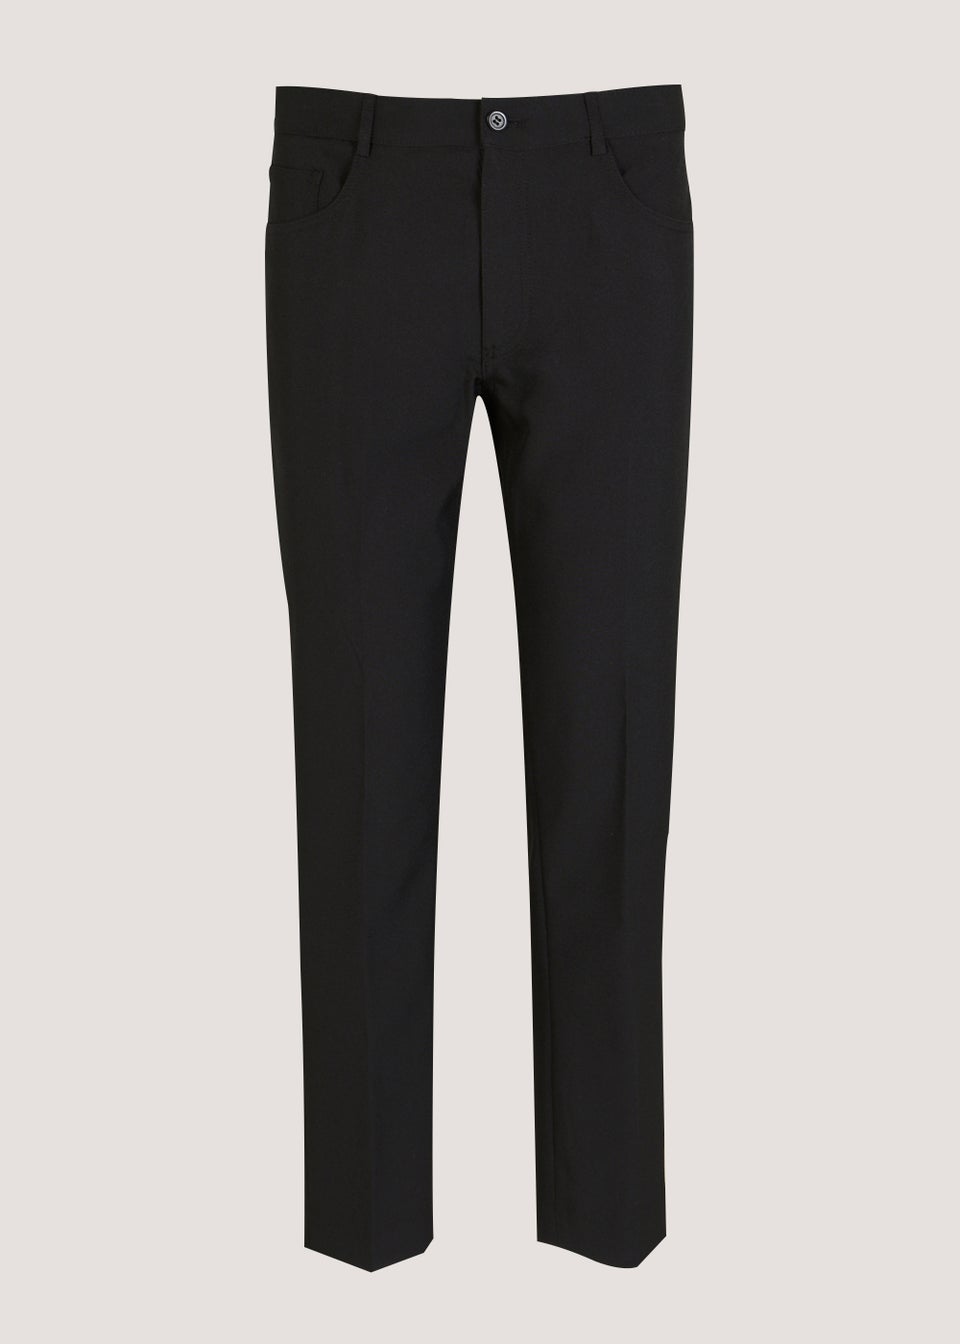 Mens Oversized Straight Suit Pants With Sashes Gray/Black Ribbon Design,  Loose Fit For Casual And Hip Hop Style Baggy Mens Linen Trousers Matalan  From Hregh, $32.79 | DHgate.Com